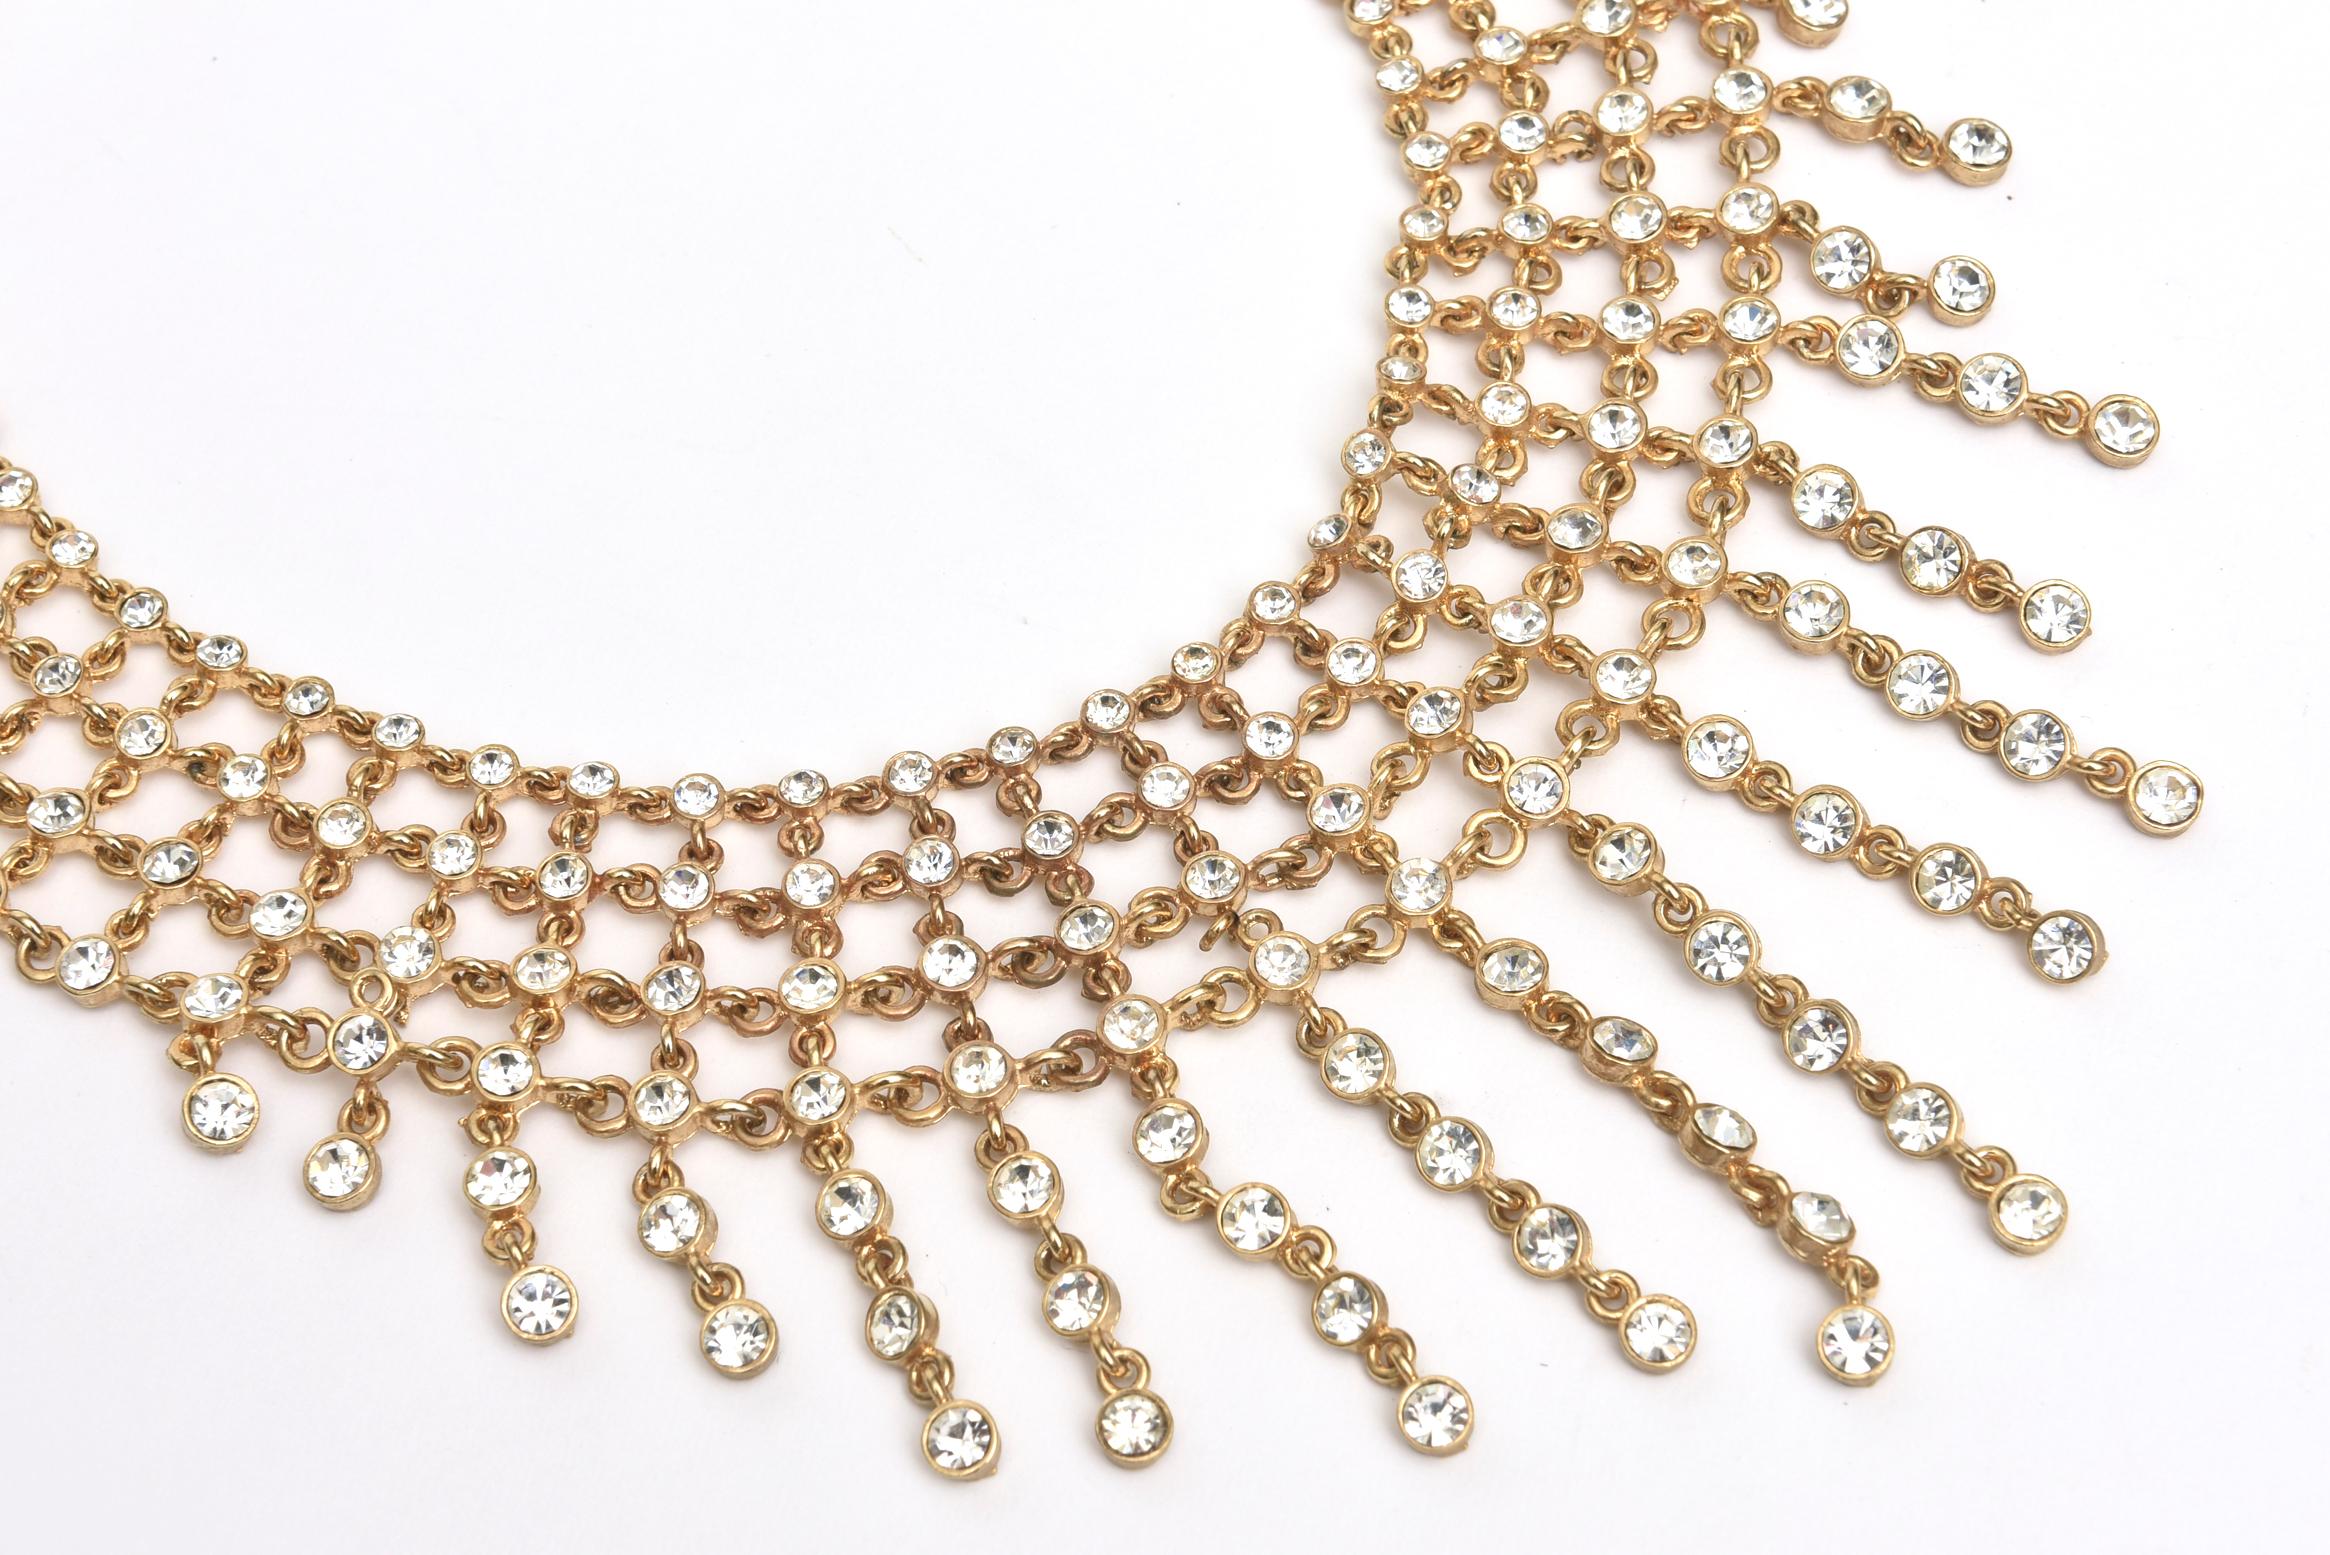 This stunning and elegant cascading bib necklace is filled of 4 tiers of rhinestones set in folded metal with hanging stands of the same at the bottom. They are different lengths. You can make it longer or shorter on the neck as there are approx 8